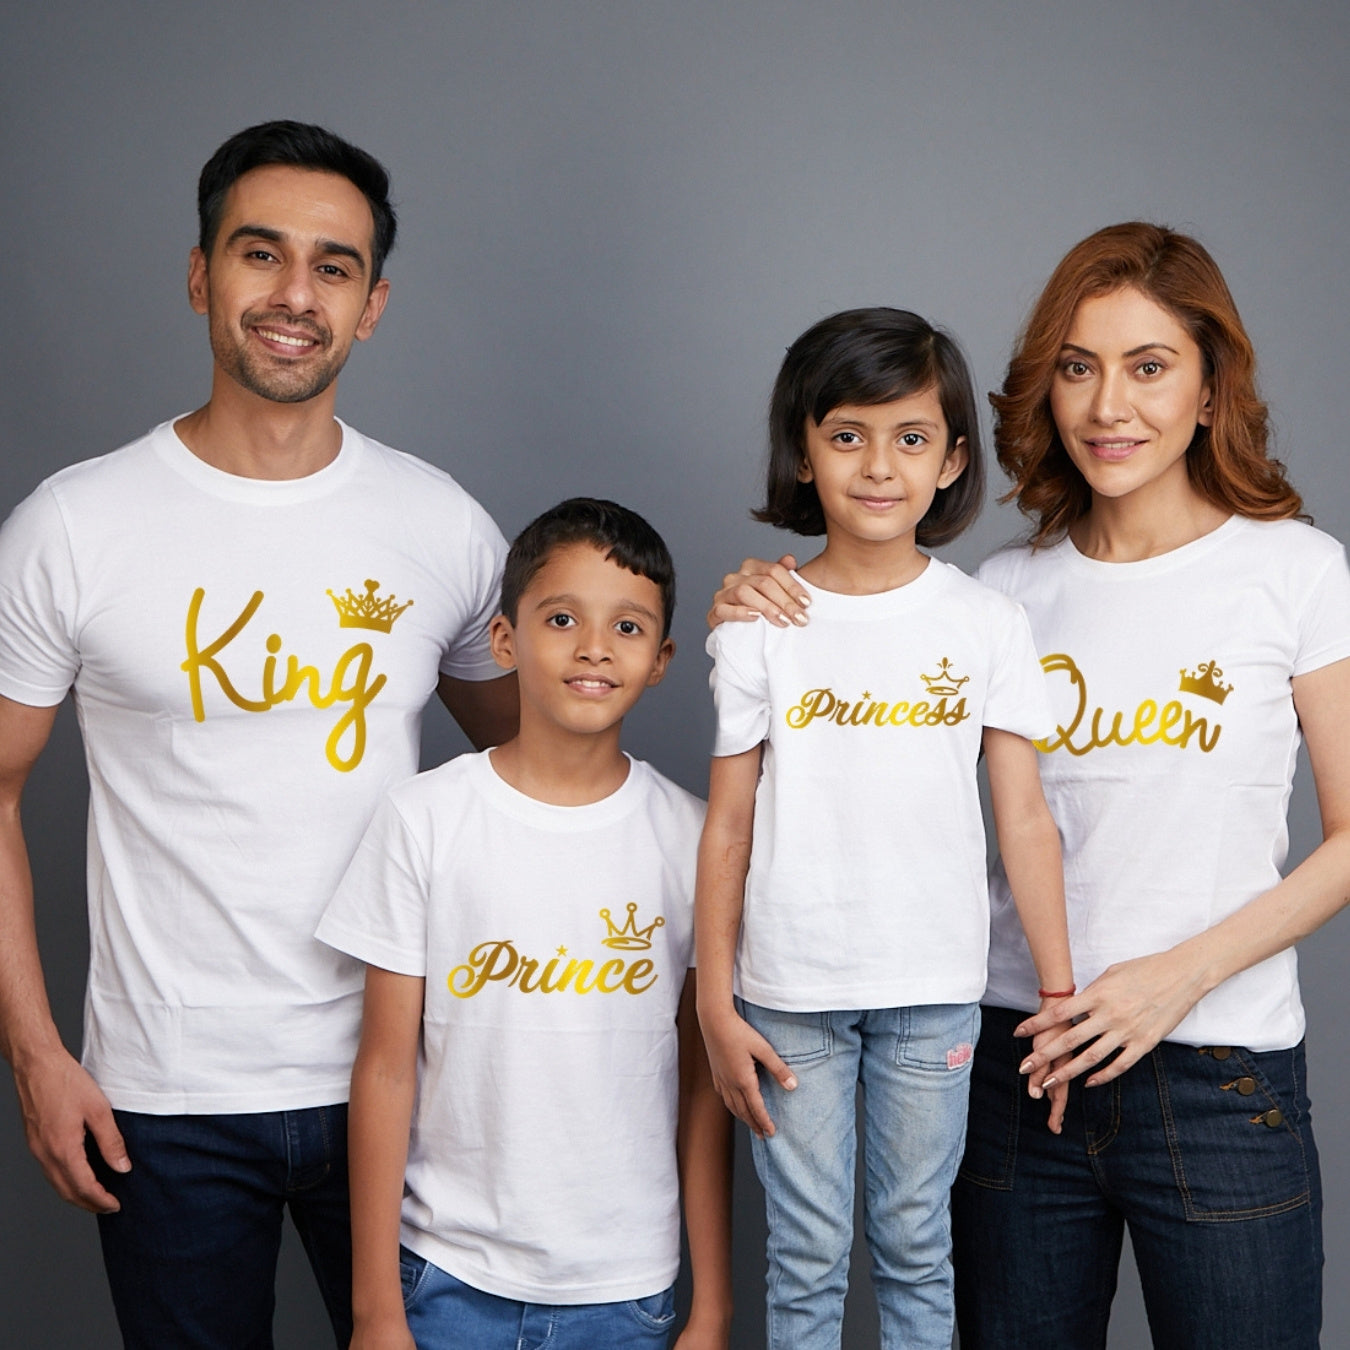 Family t shirts set of 4 Mom Dad Son Daughter in White Colour - King Queen Prince Princess All Gold Variant